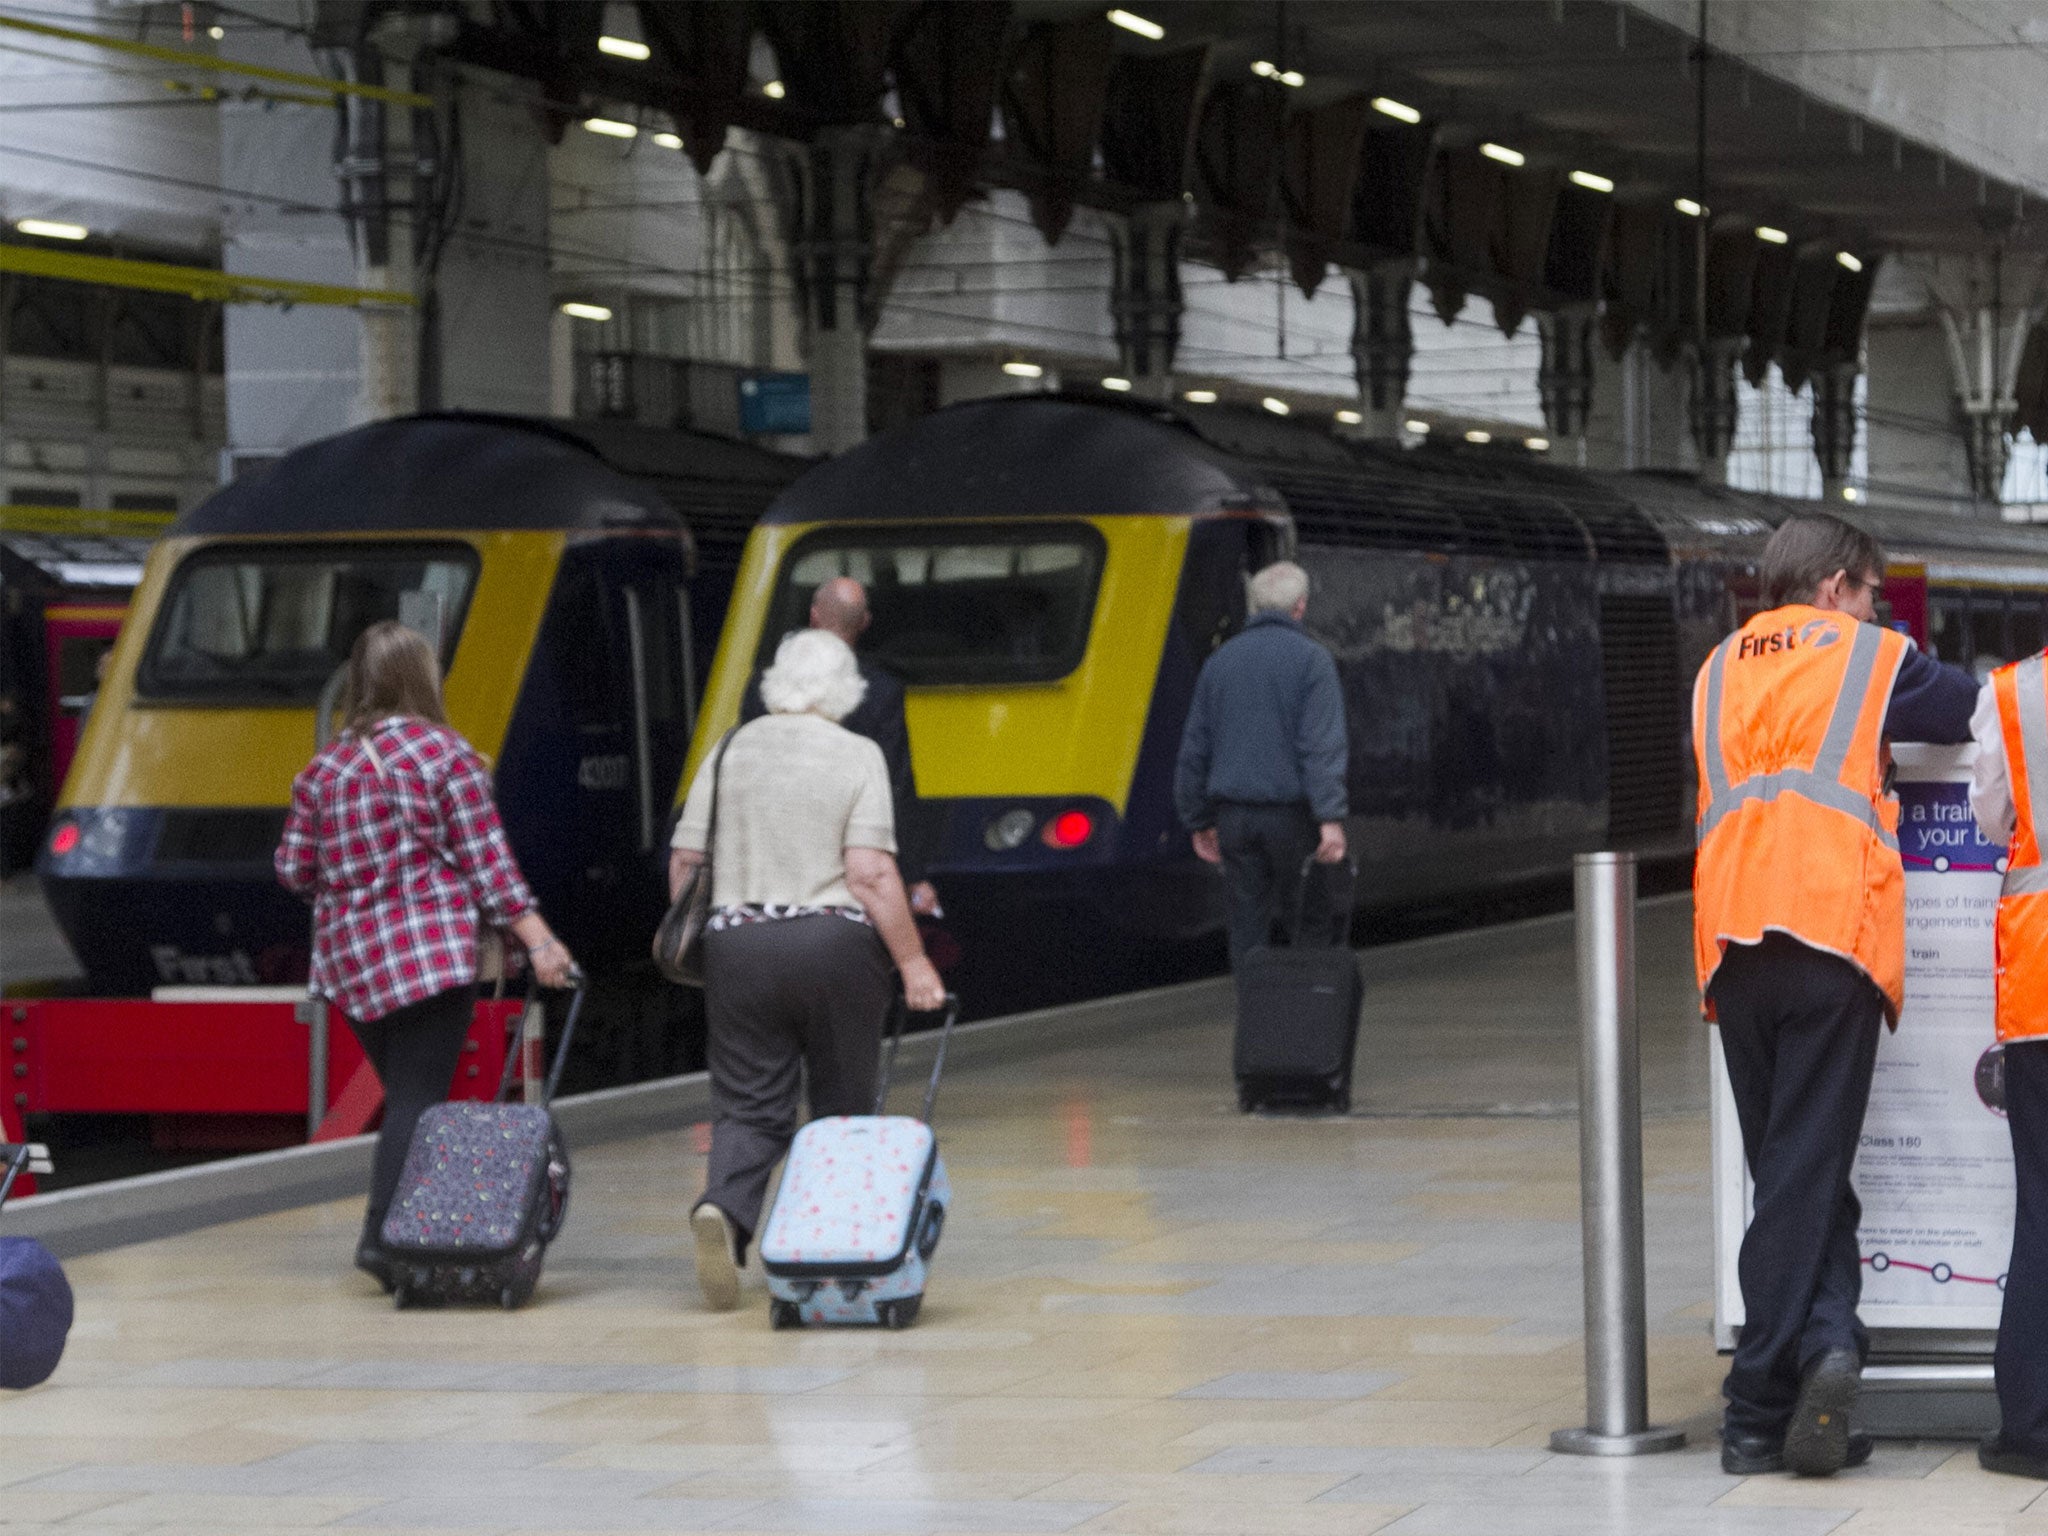 The First Great Western strike is likely to affect routes in south-west England and Wales